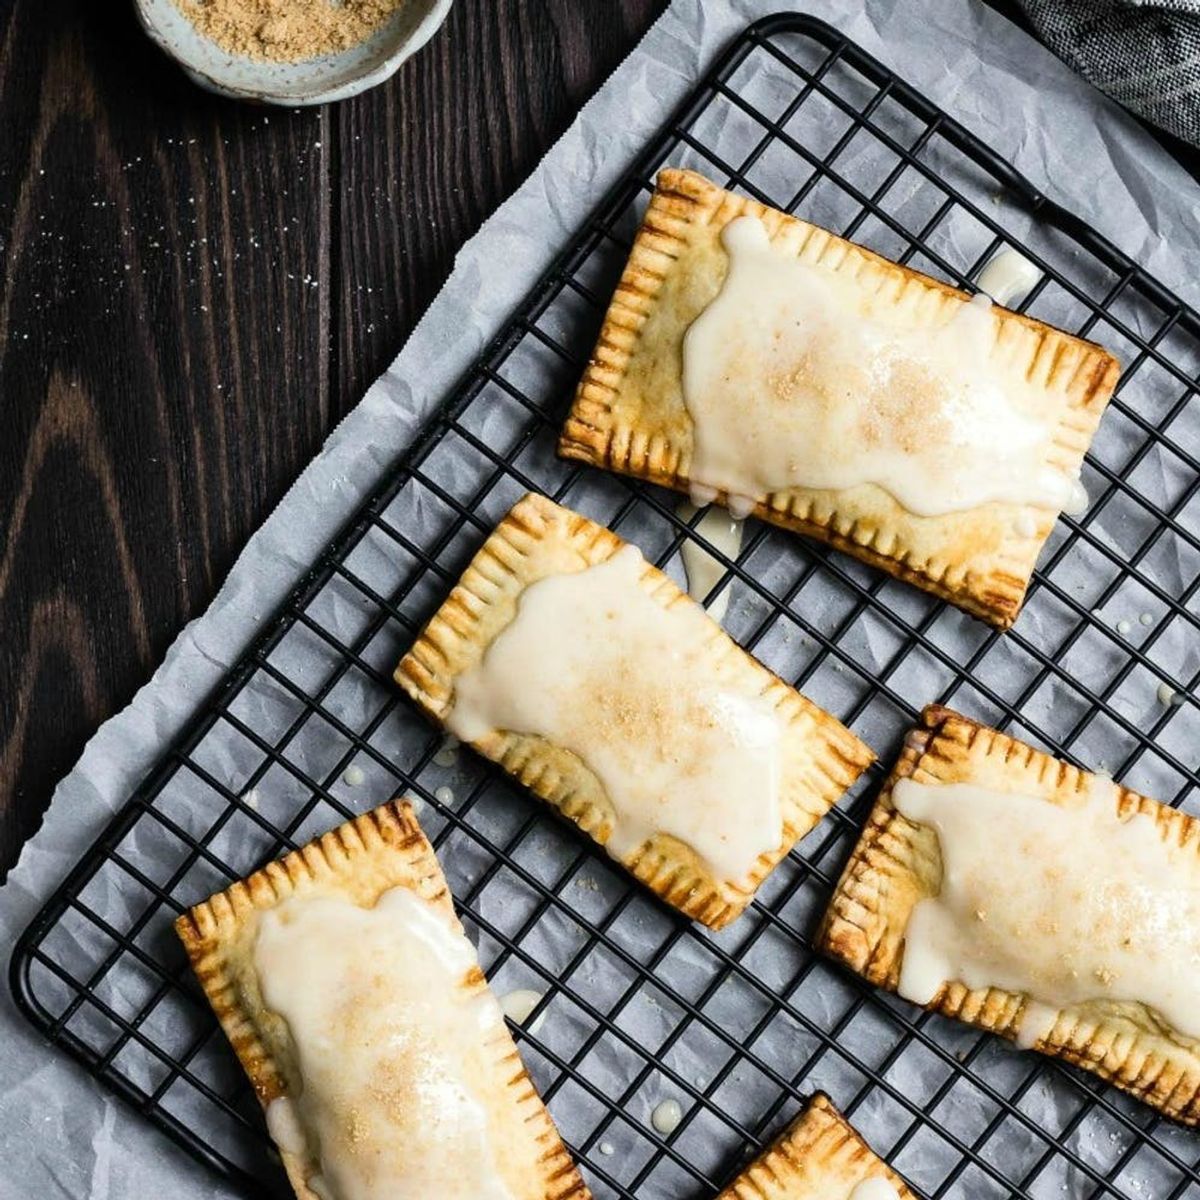 10 Homemade Pop Tarts to Warm You Up on Winter Mornings